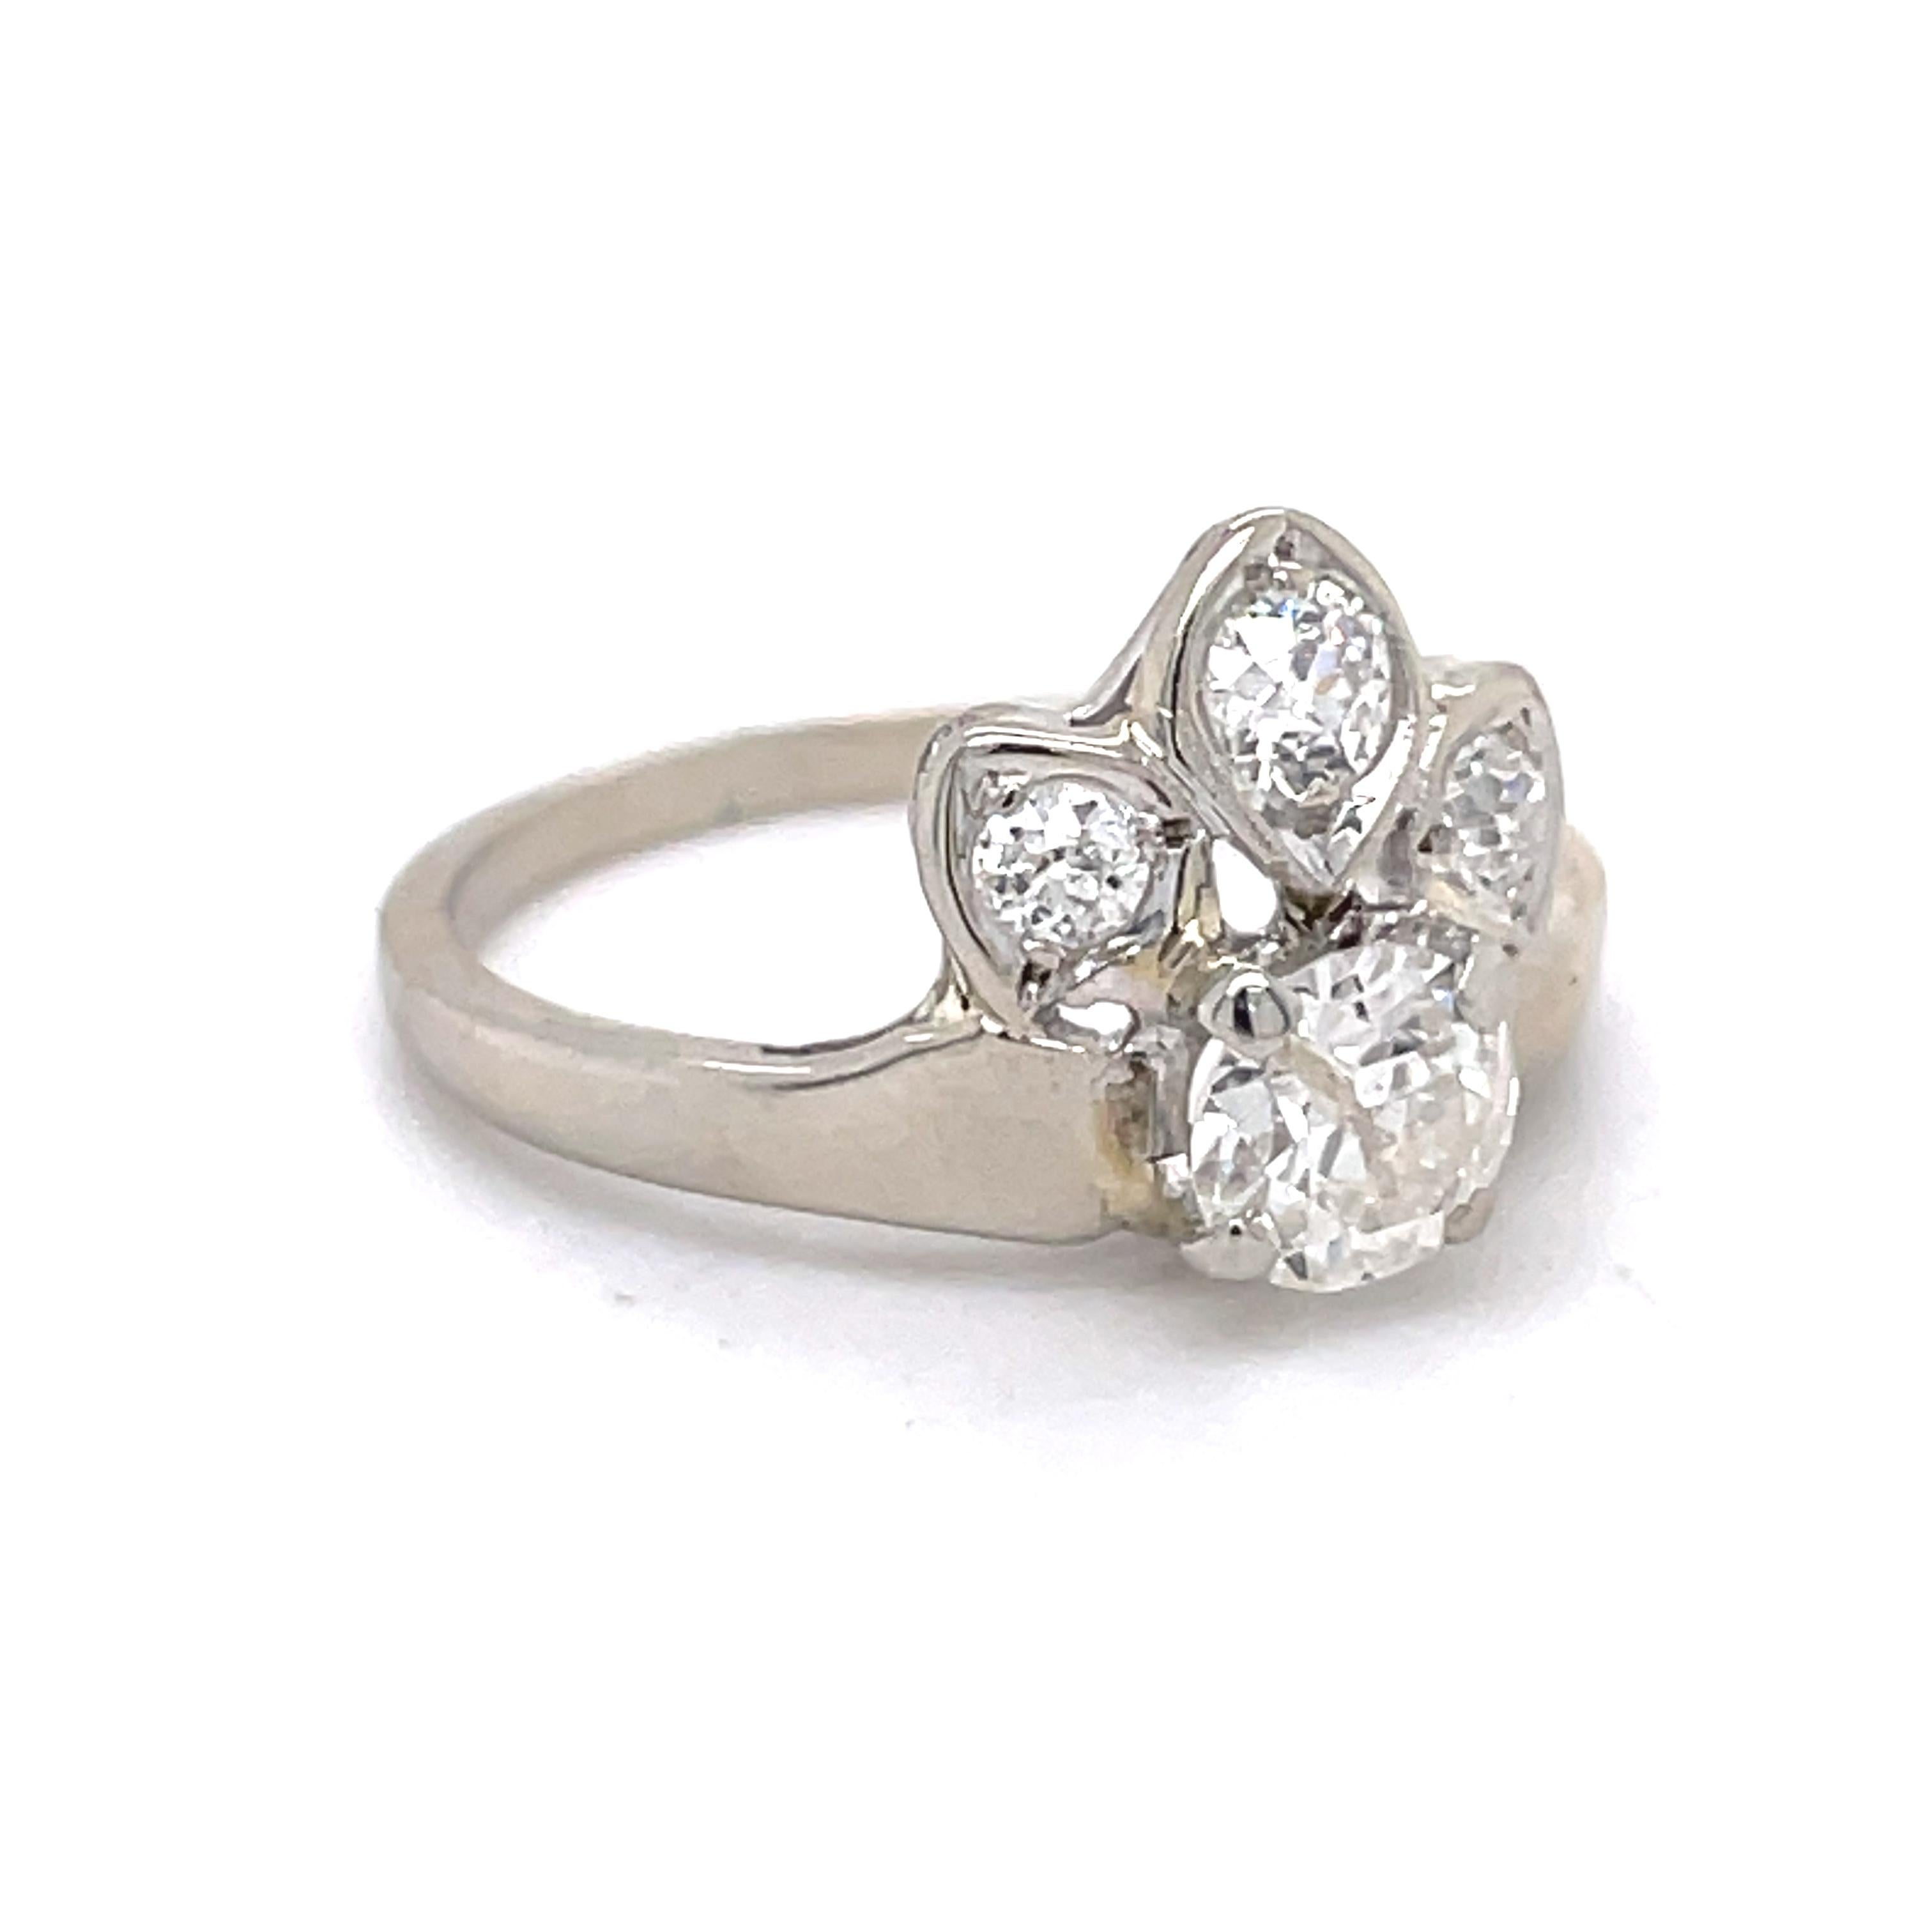 Vintage Engagement Ring - 1CT Old European Natural Diamonds, 14k White Gold In Excellent Condition For Sale In Ramat Gan, IL